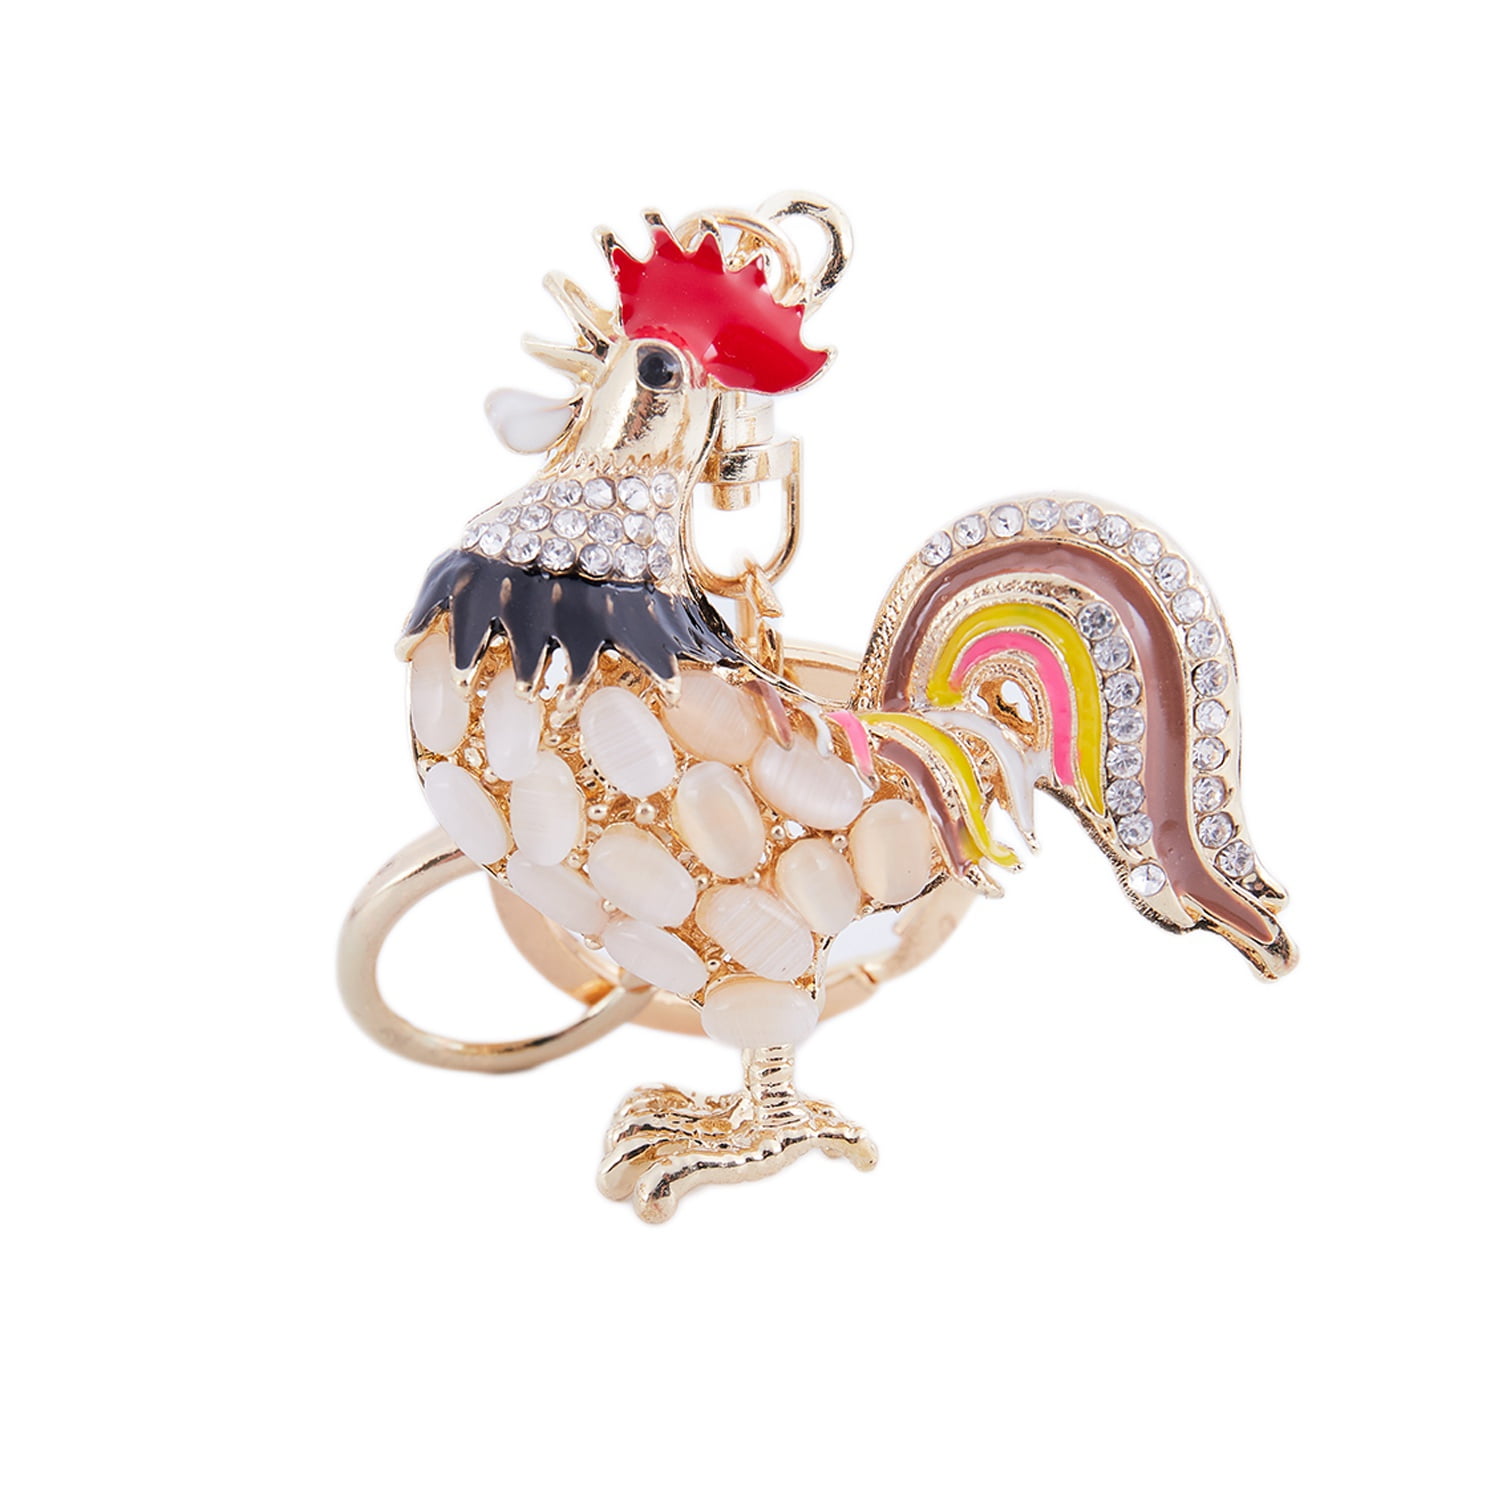 1 X Red/Gold Rhinestone Rooster Keyring Keychain Bag Charm Gift Crystal 